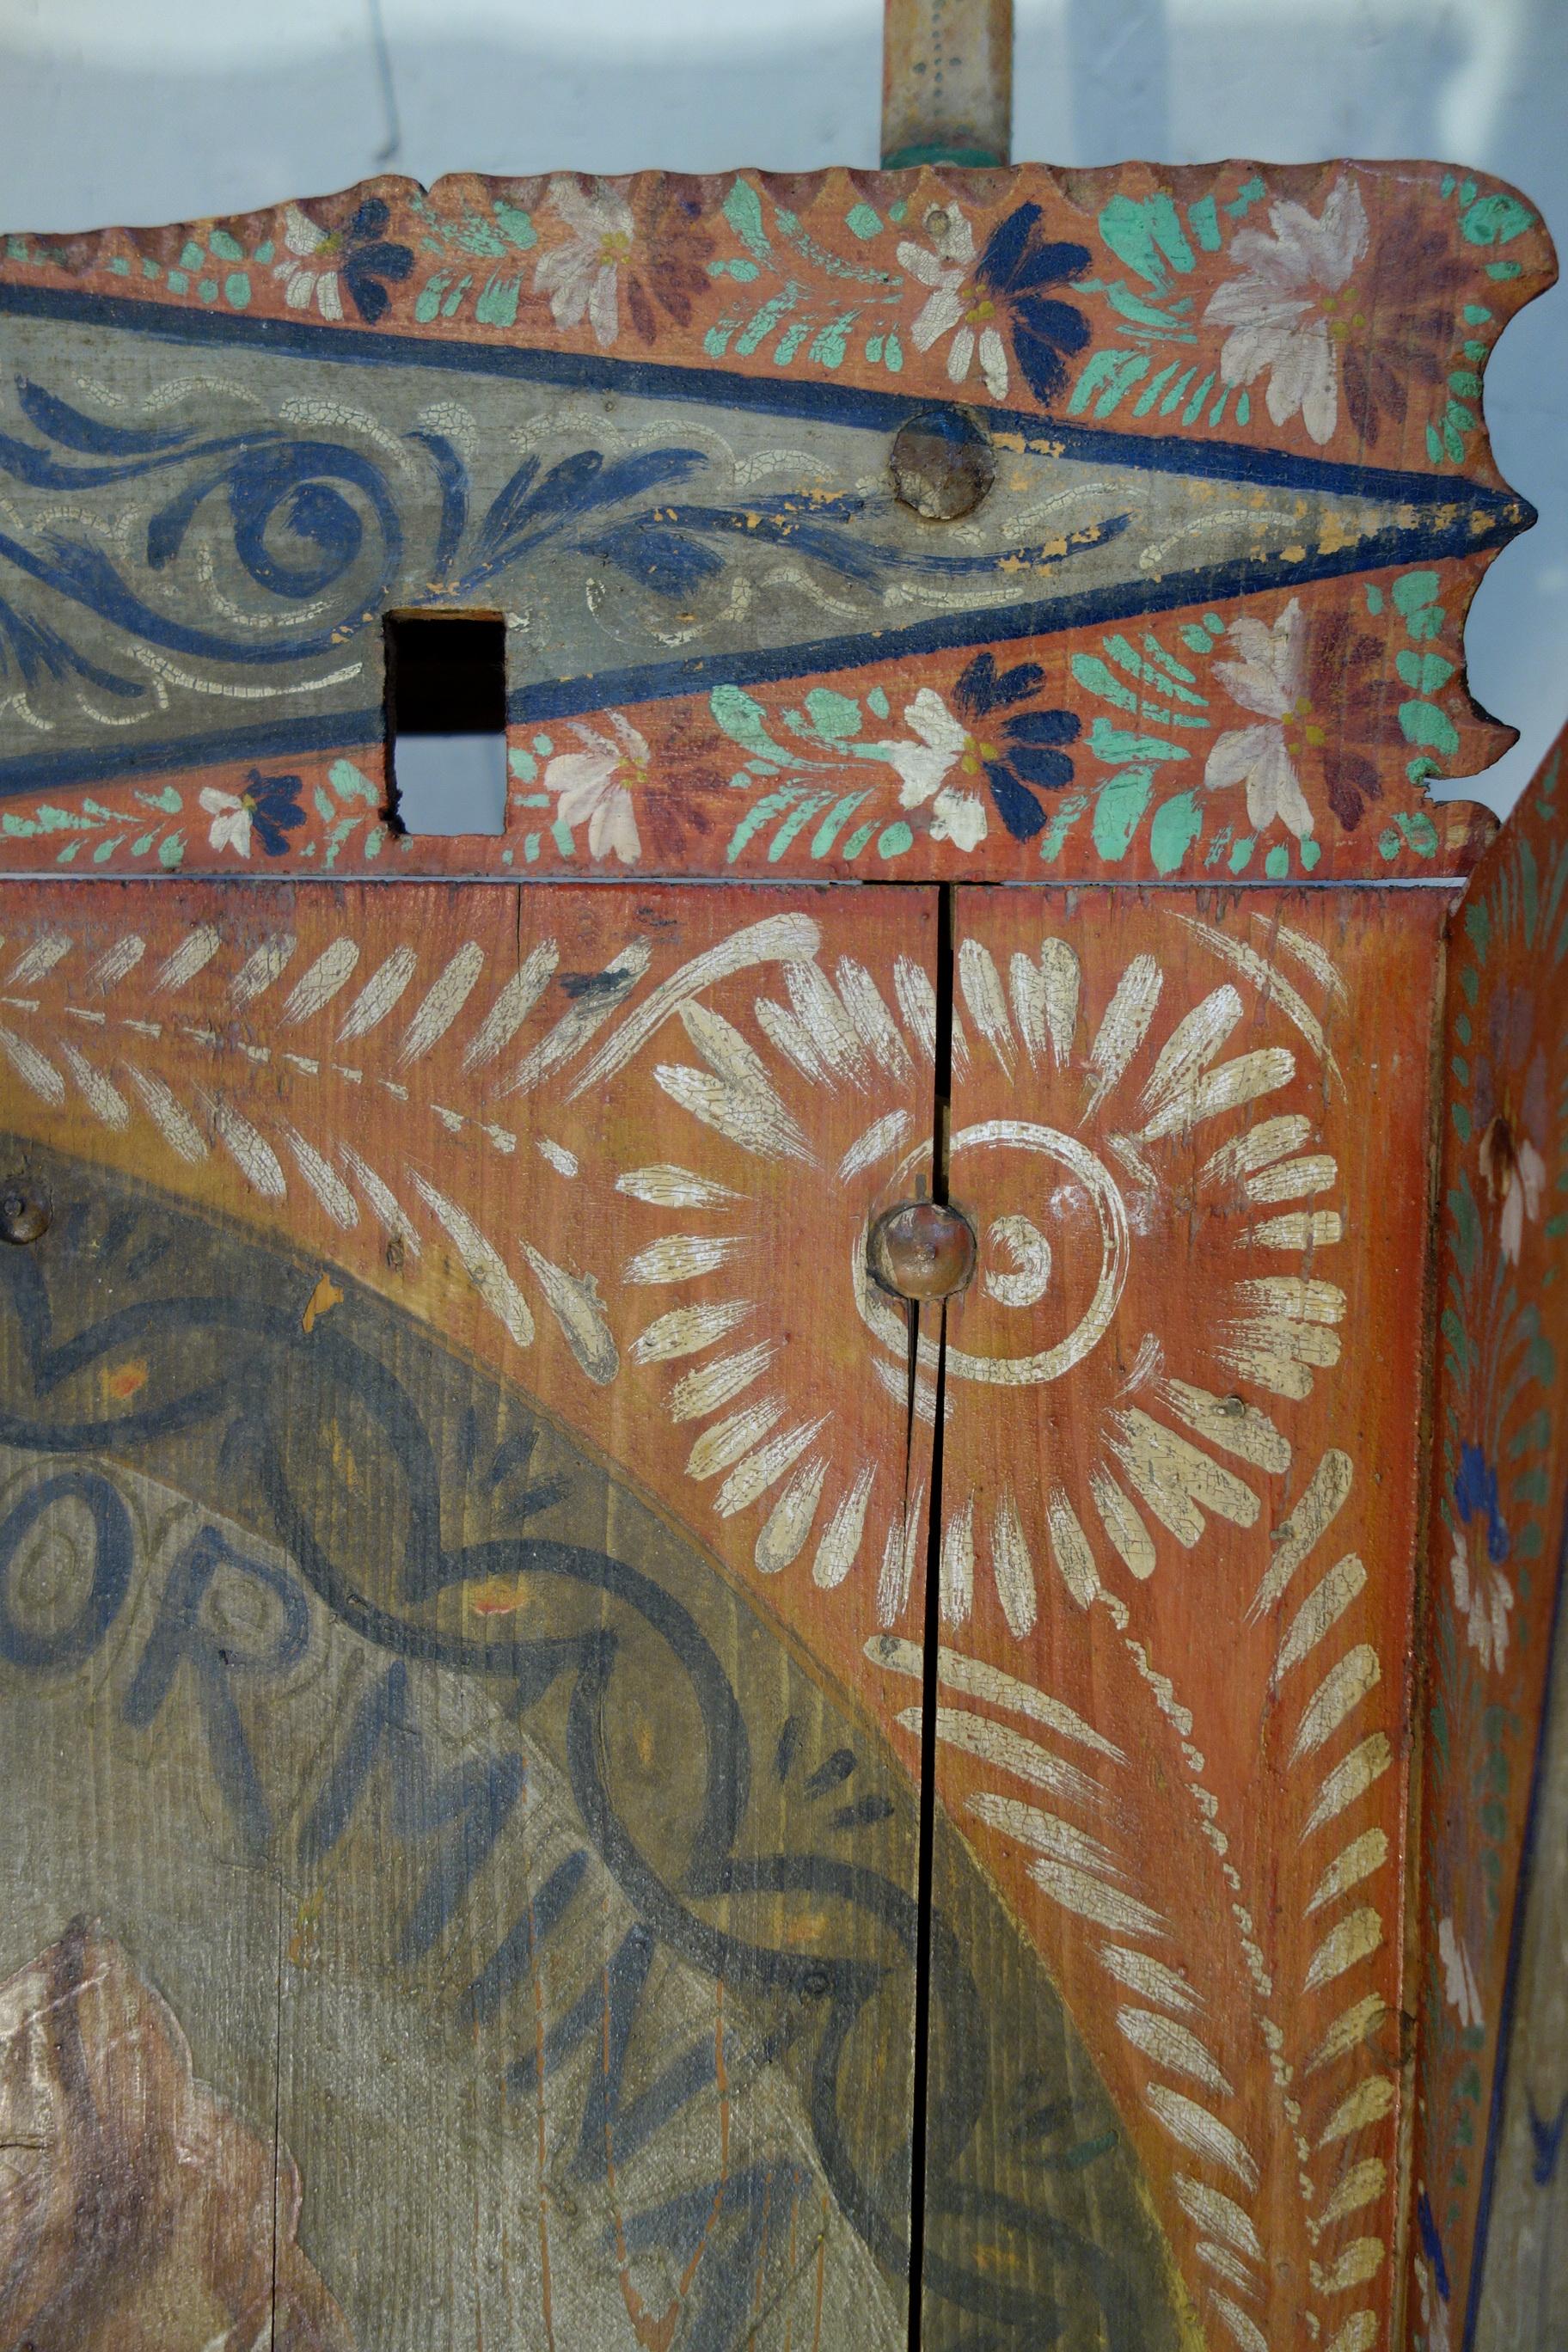 Forged 19th Century Italian Hand Painted Carretto Sicilian Cart, Cultural Art Form